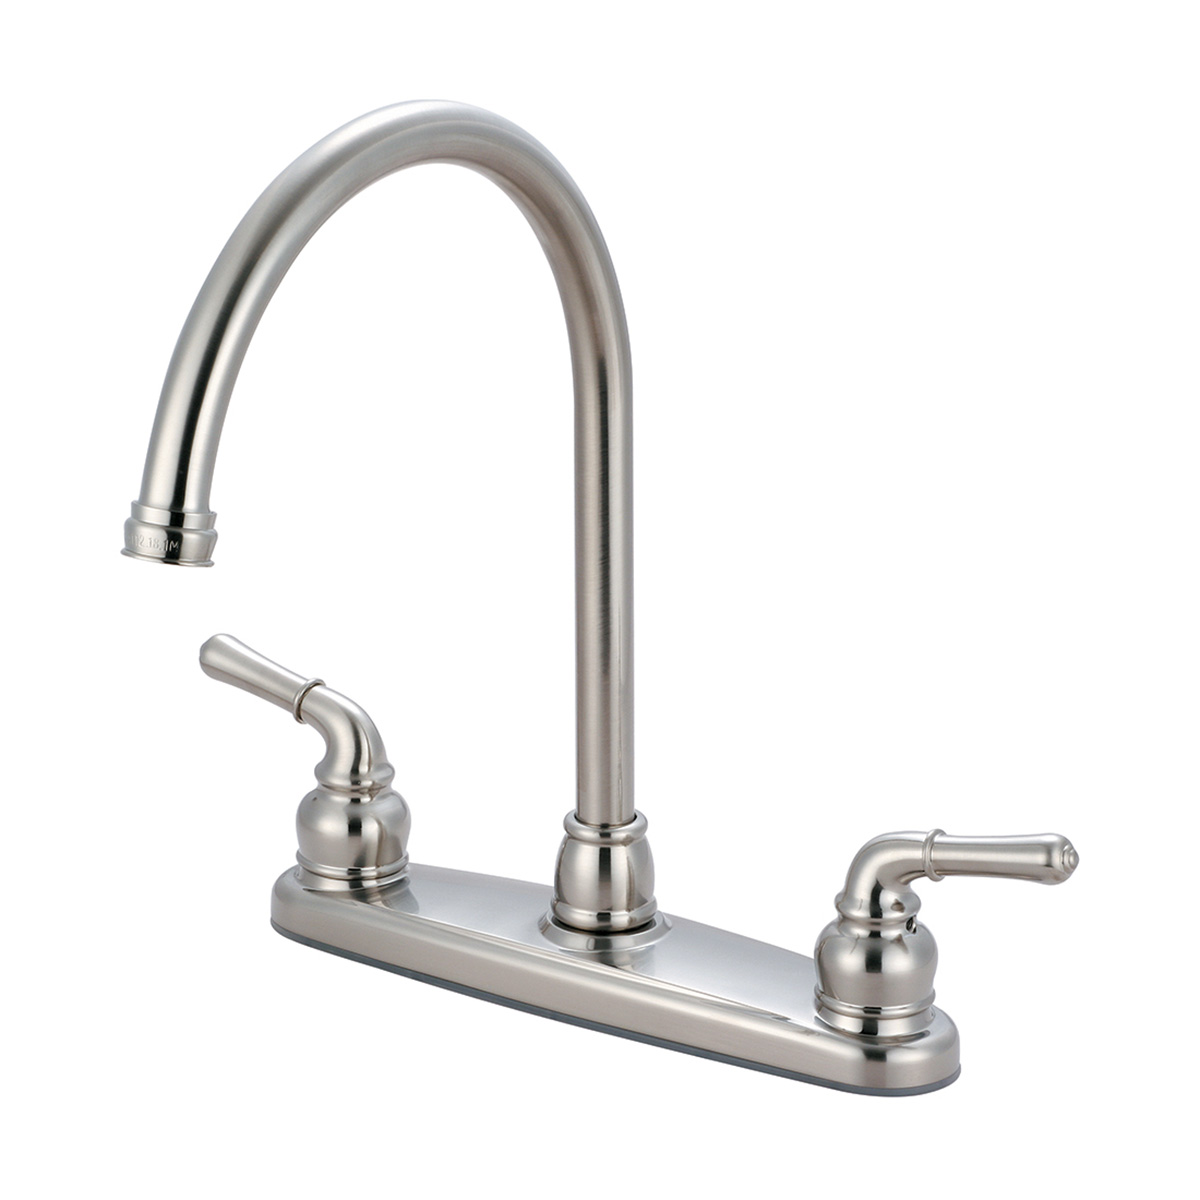 K-5340-bn Two Handle Kitchen Faucet - Brushed Nickel